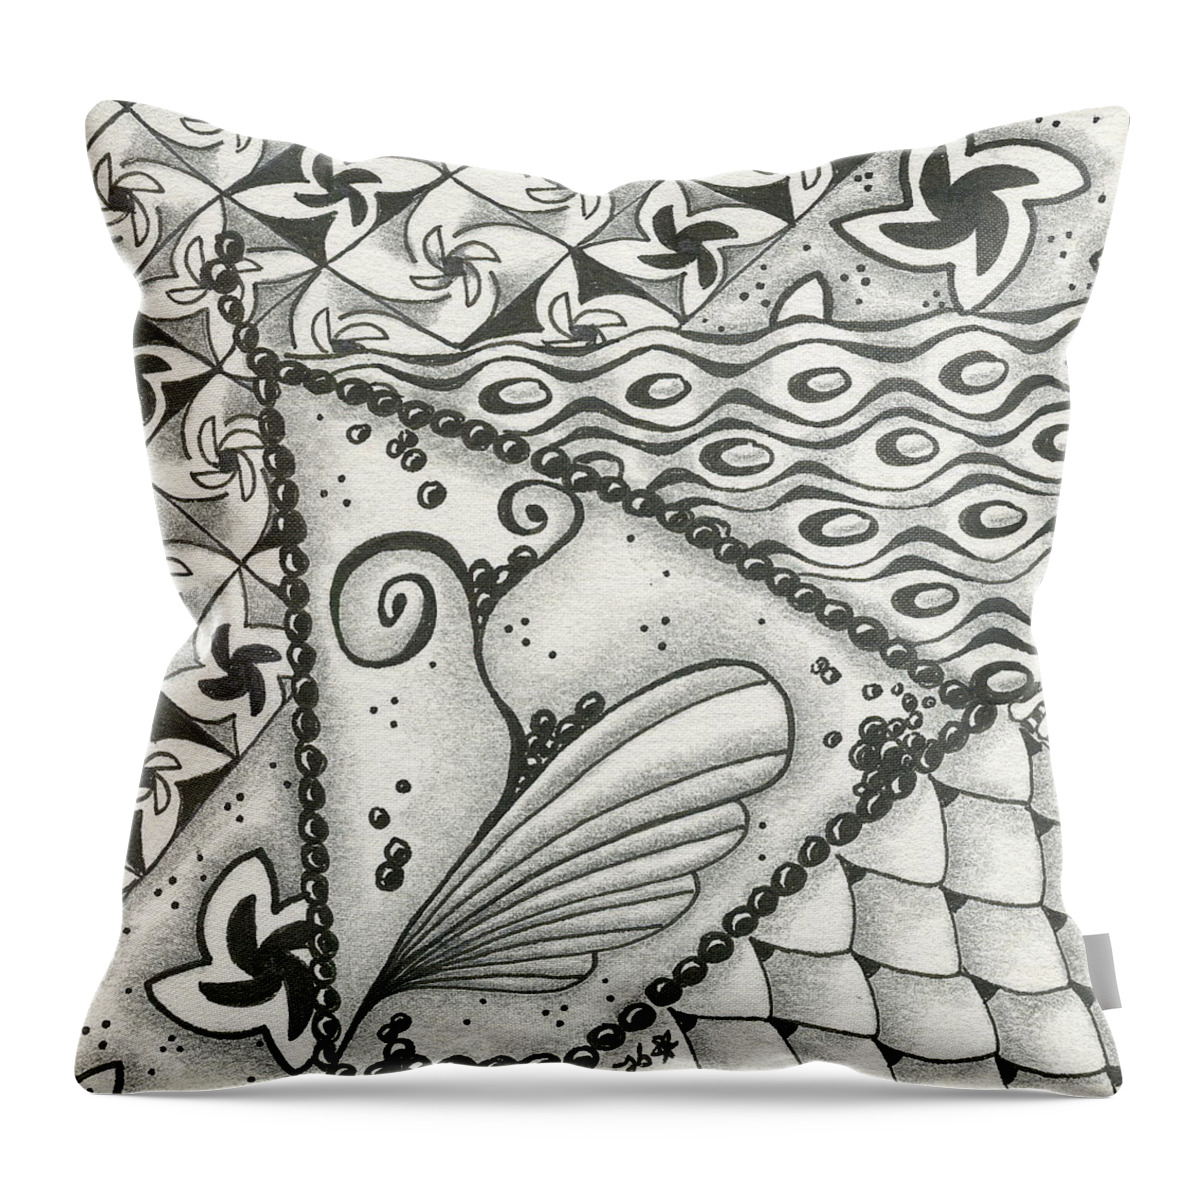 Zentangle Throw Pillow featuring the drawing Time Marches On by Jan Steinle